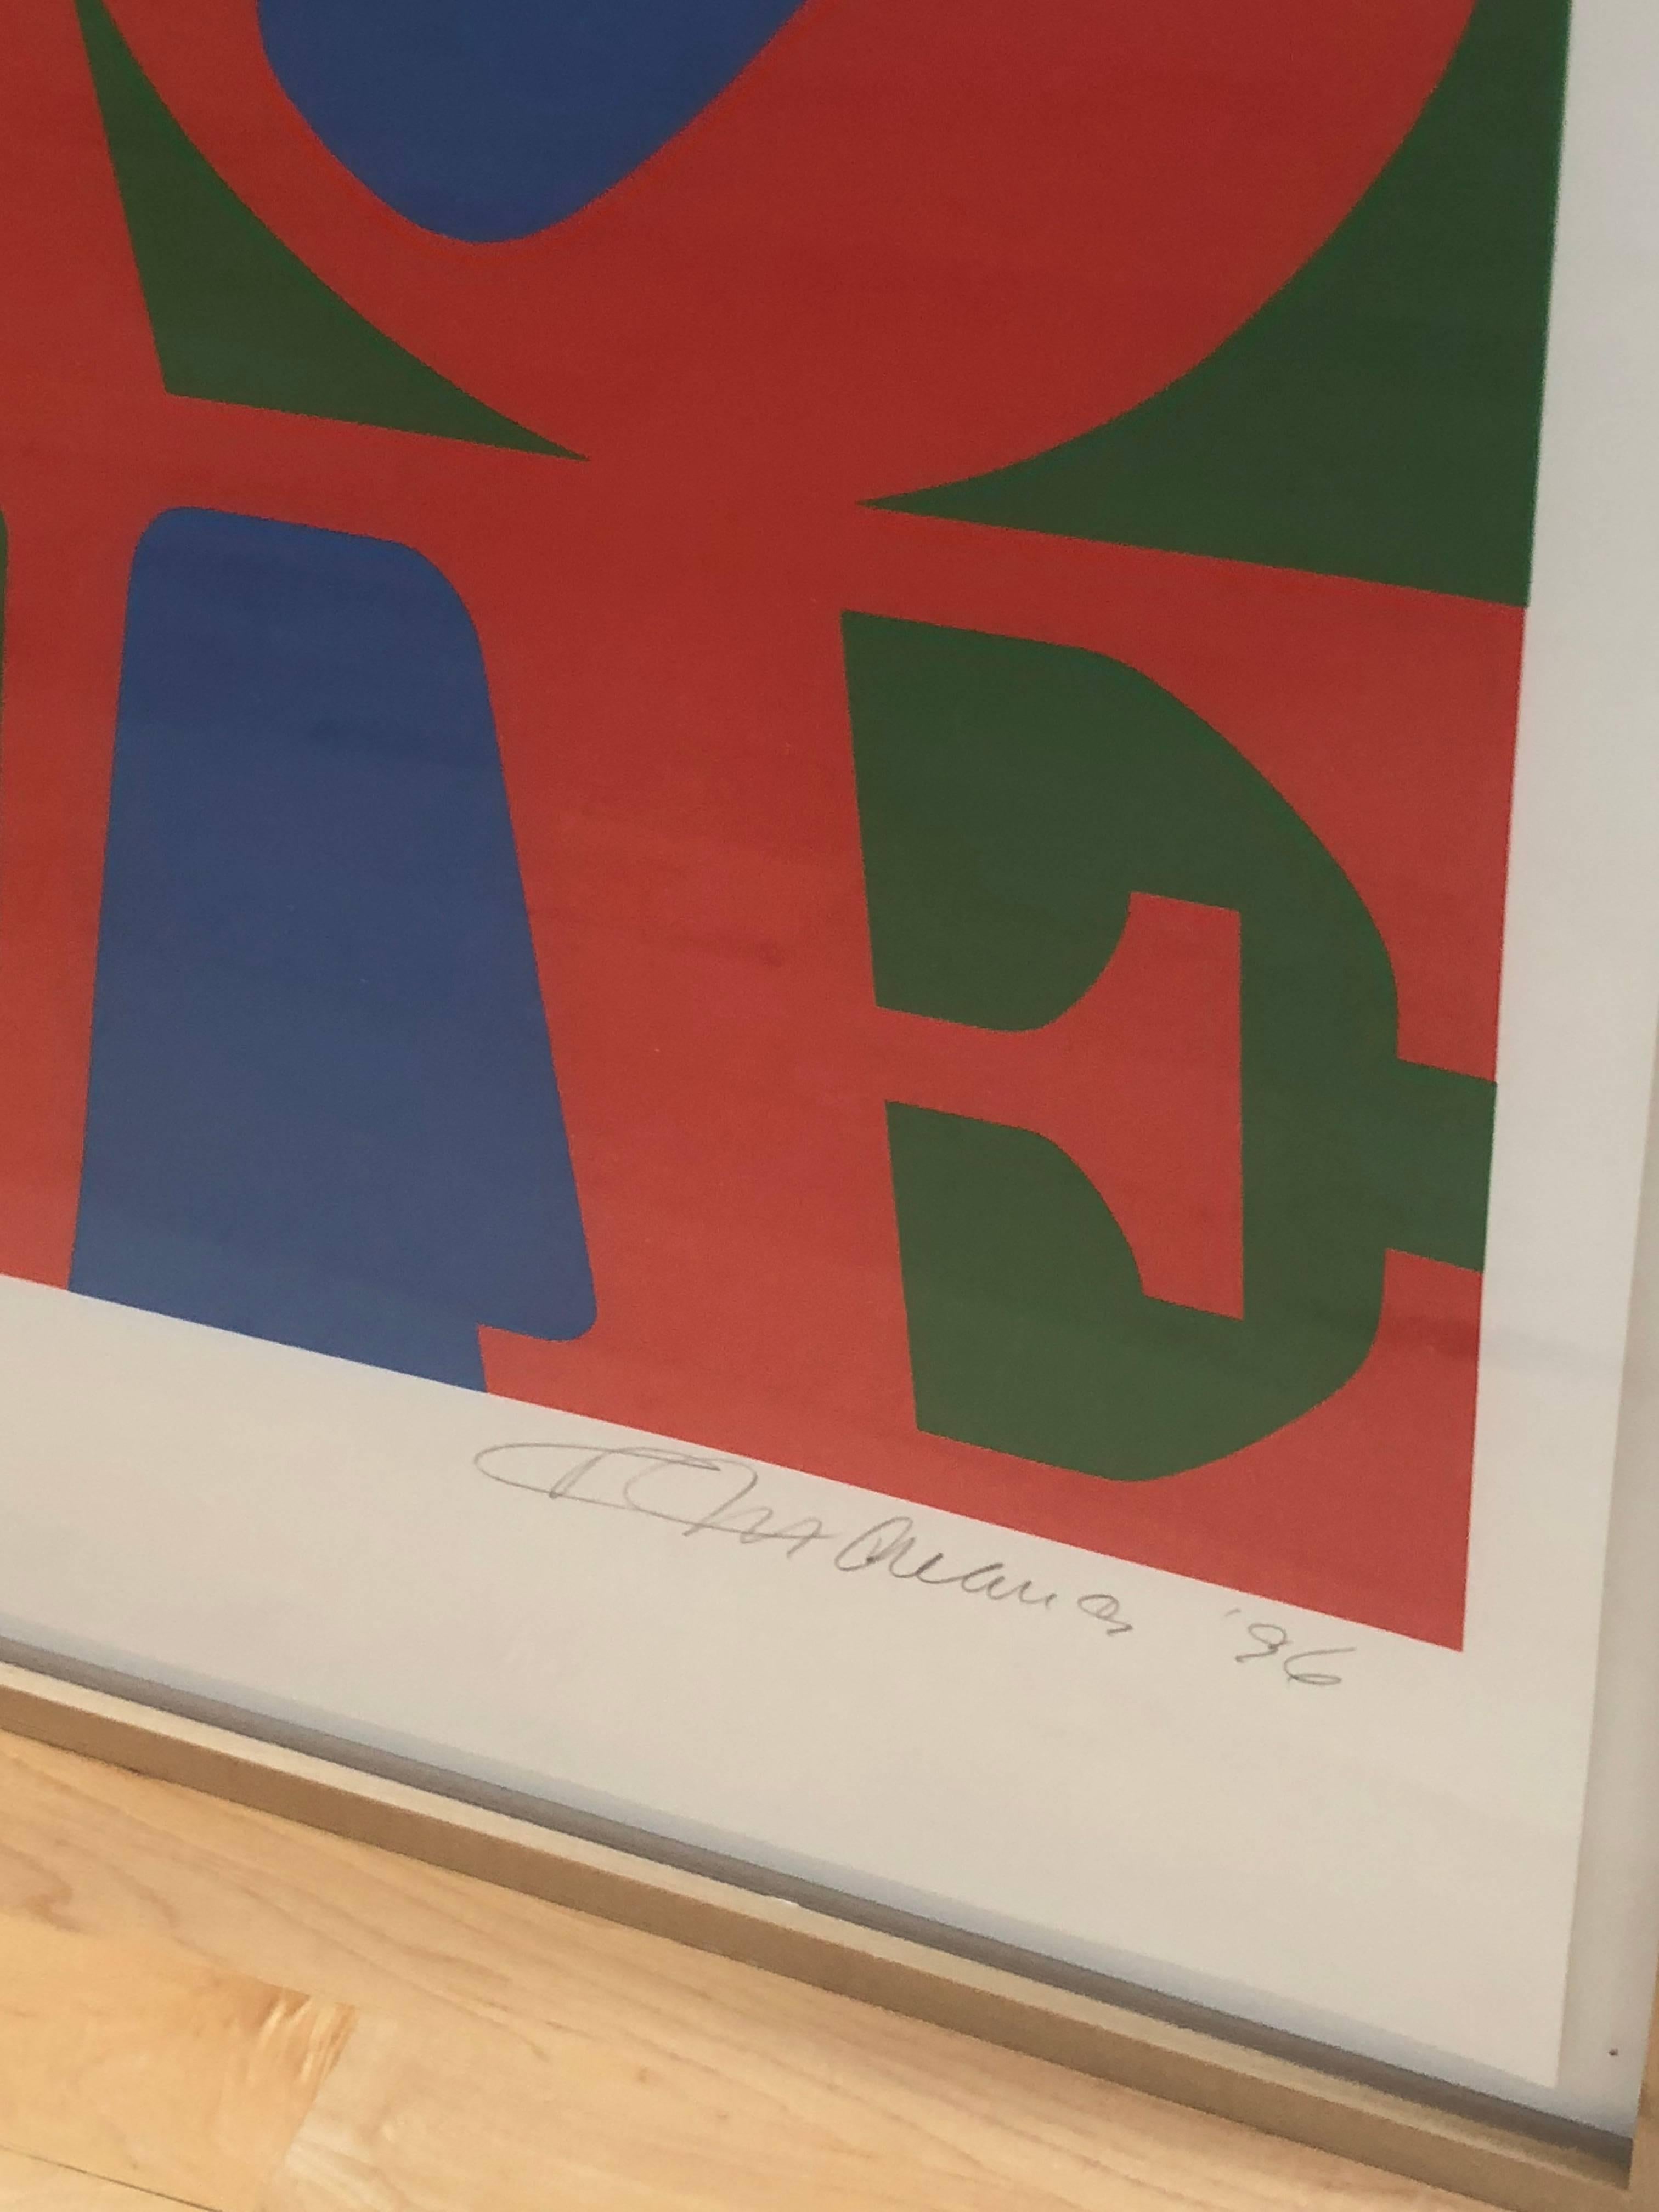 20th Century Pop Art Signed and Numbered Robert Indiana, LOVE, 1996 2